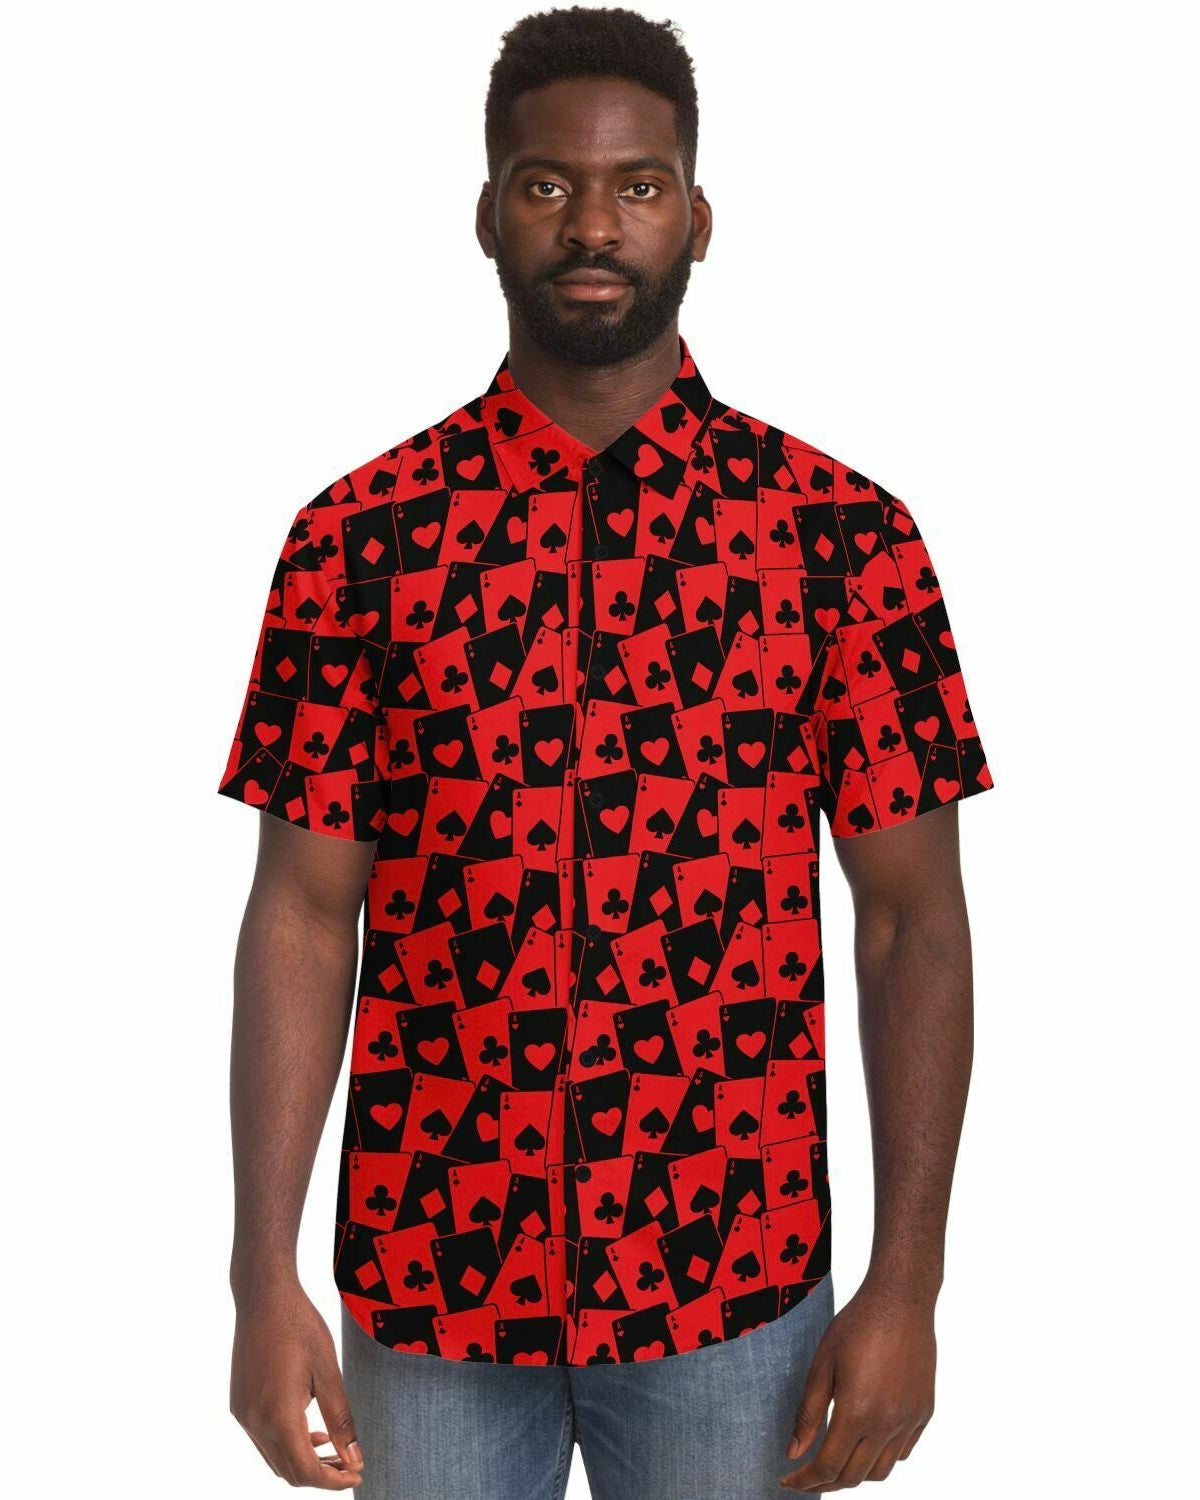 Ace Of Hearts Party Shirt, Short Sleeve Button Down Shirt, - One Stop Rave